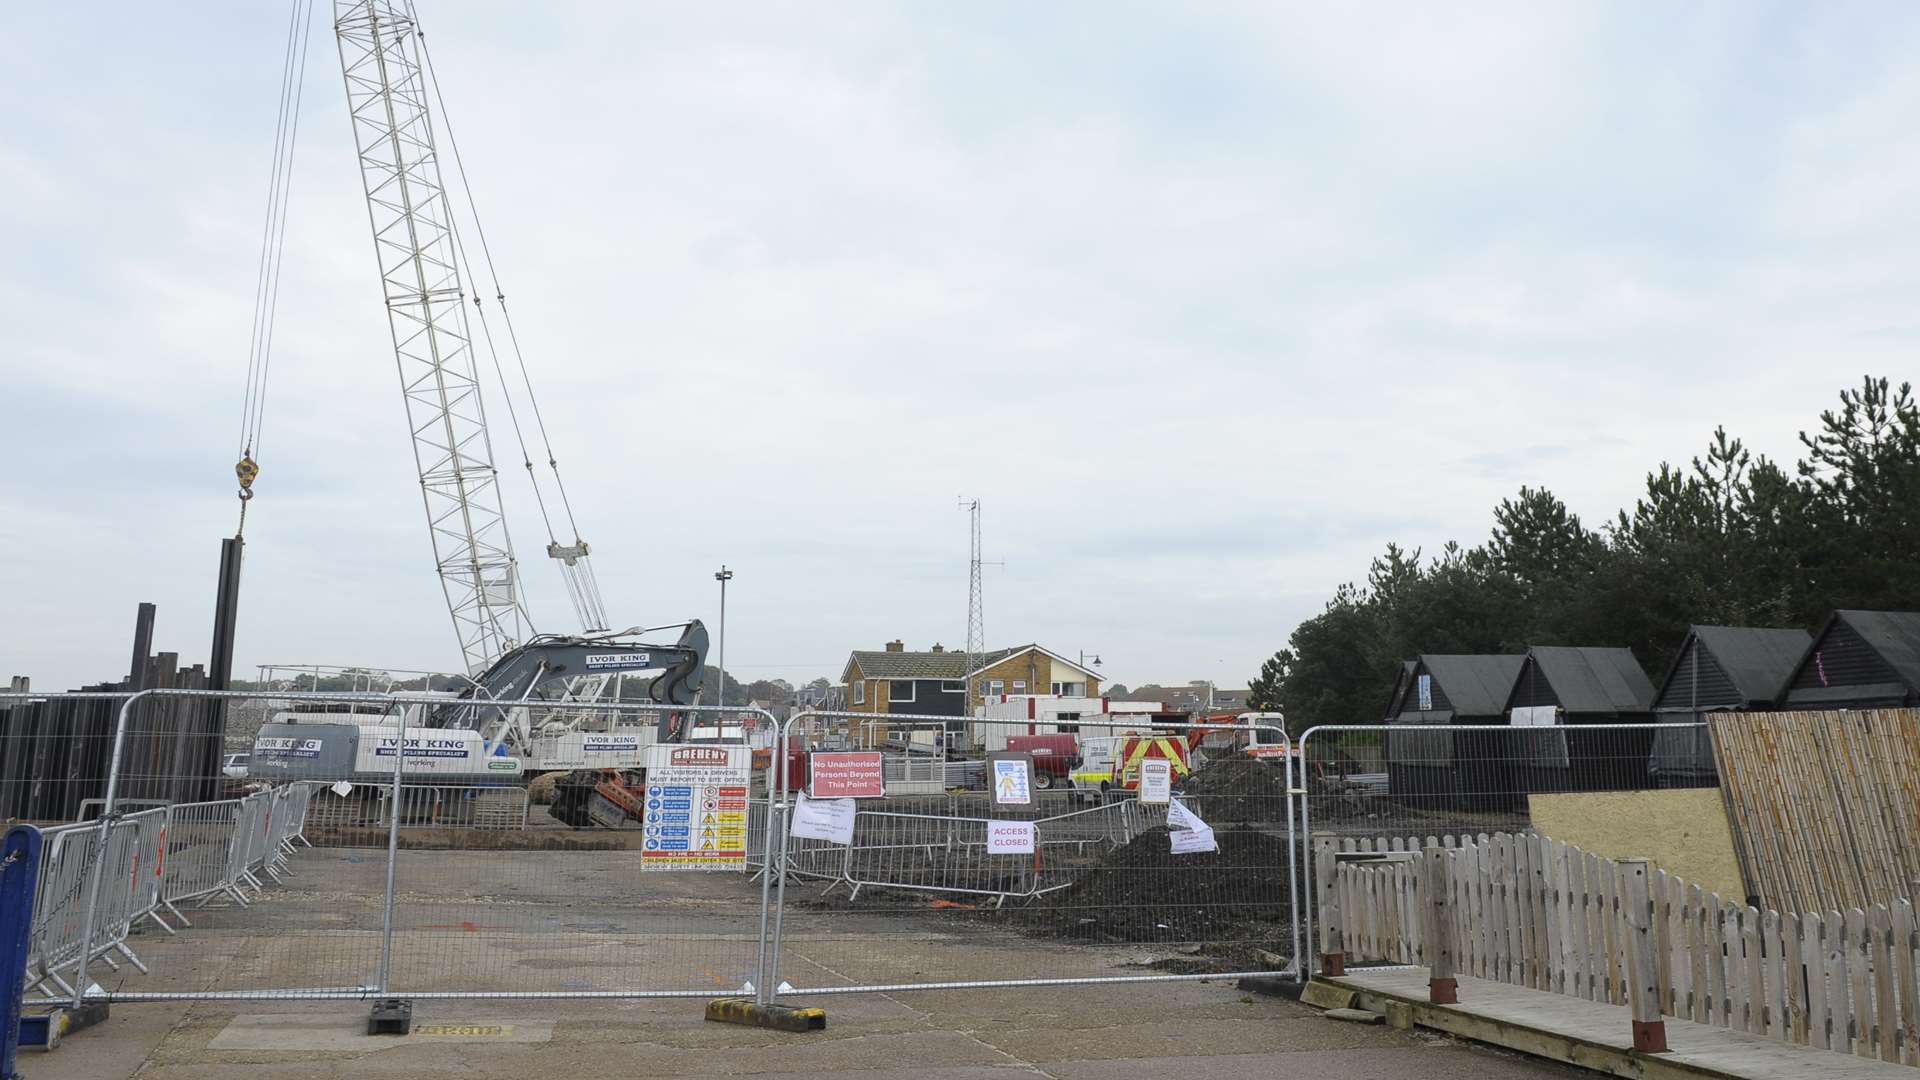 Improvements at Whitstable Harbour's South Quay include a third entrance from Harbour Street to create a walkway leading to a new quay layout.